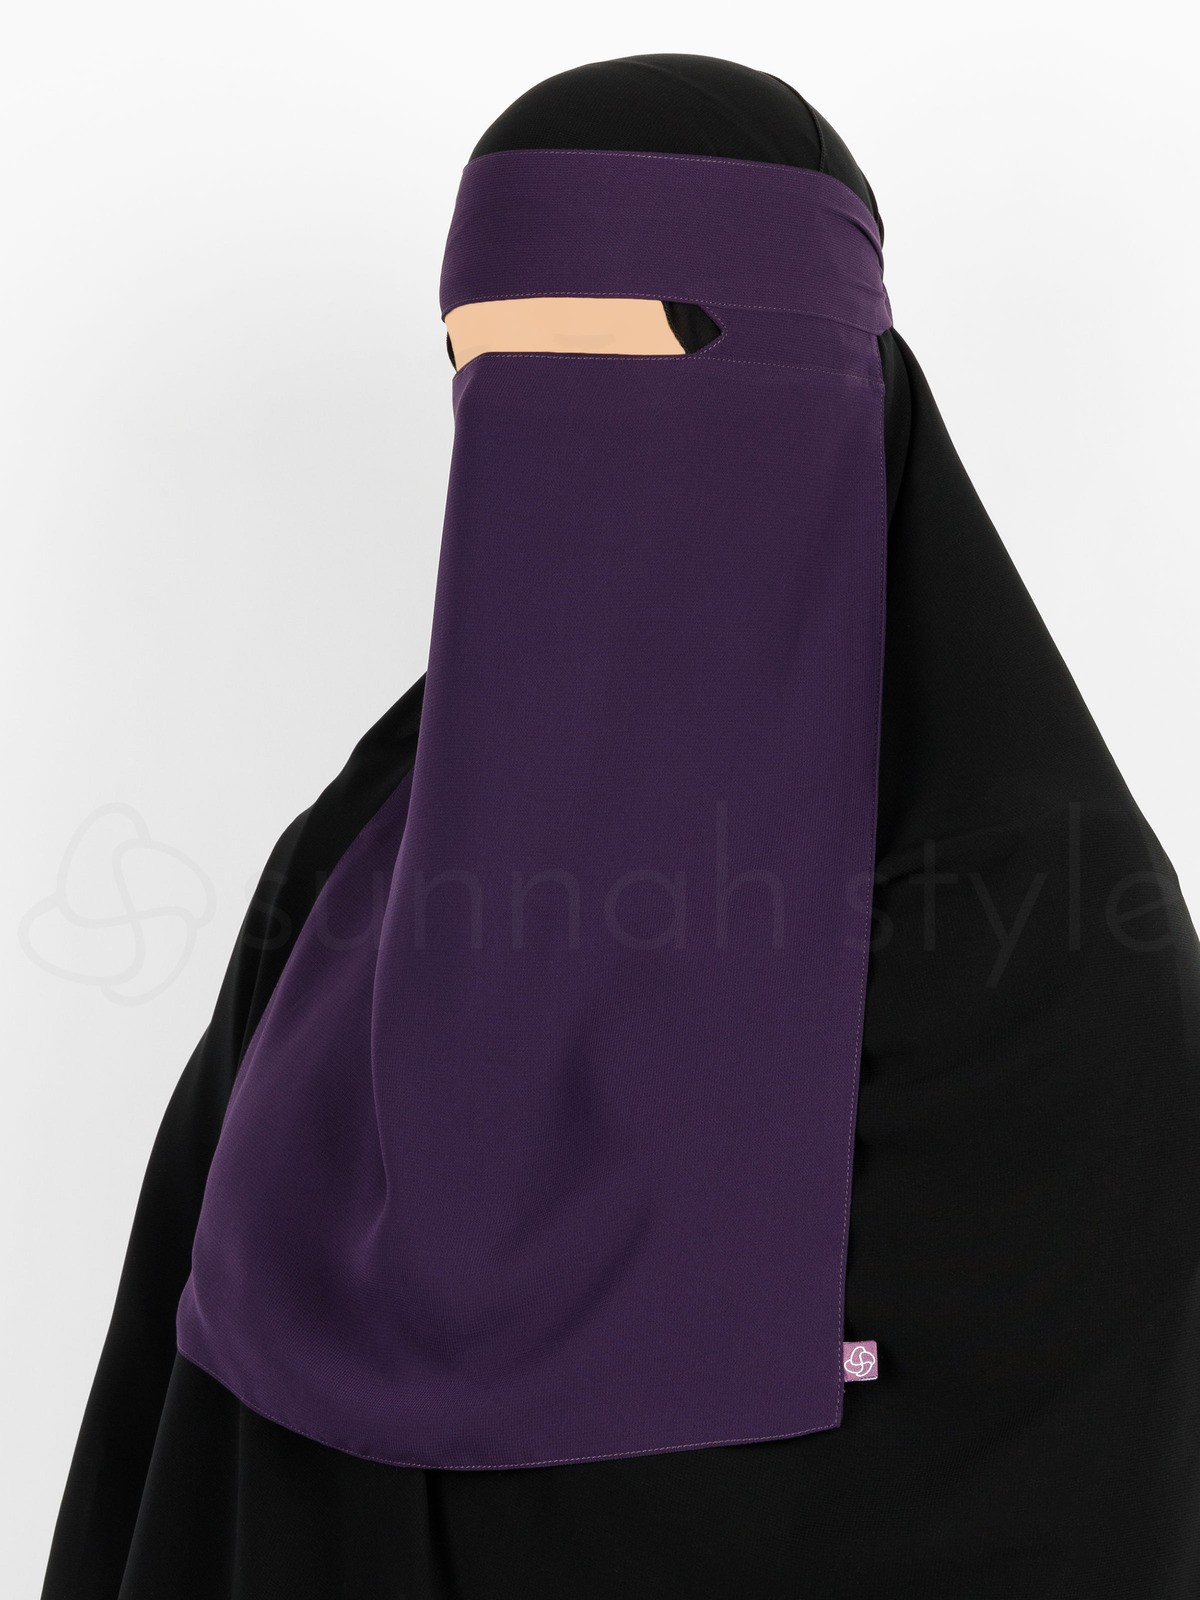 Sunnah Style - No-Pinch One Layer Niqab (Violet)